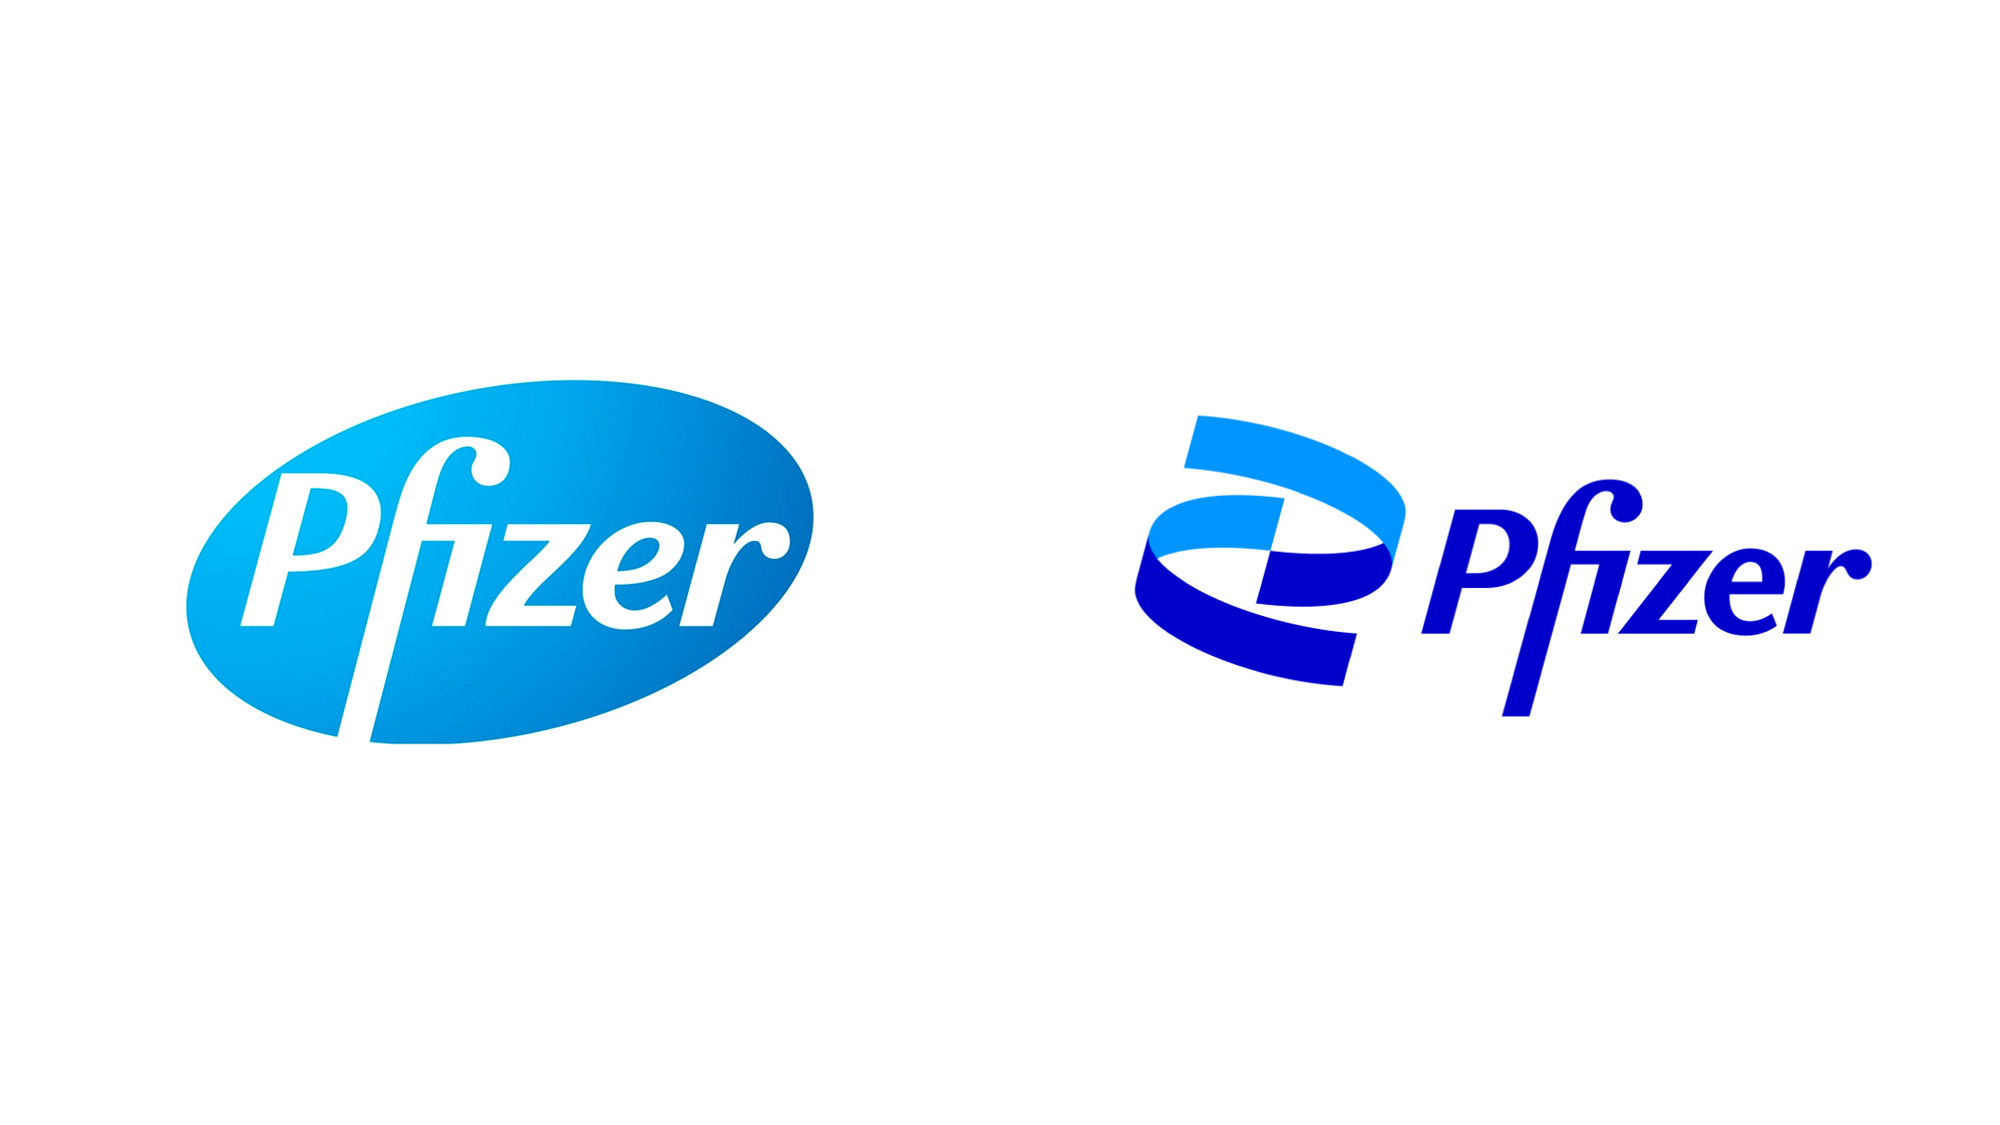 New Logo and Identity for Pfizer by Team